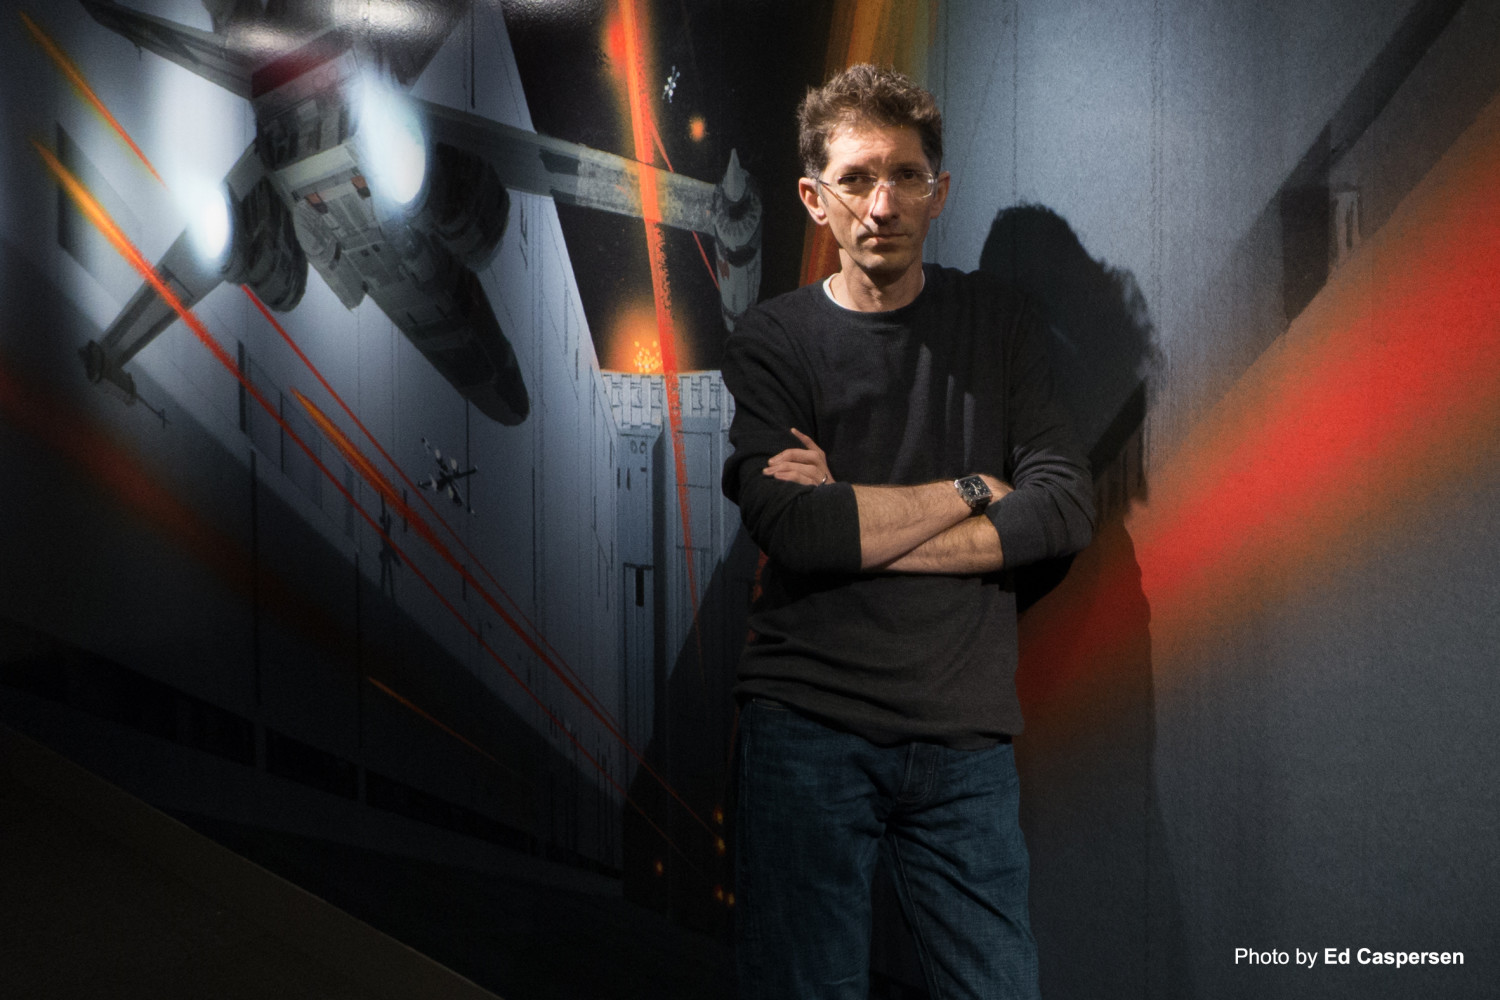 A day in the life of Joel Aron, VFX & Lighting Supervisor for Star Wars TV shows